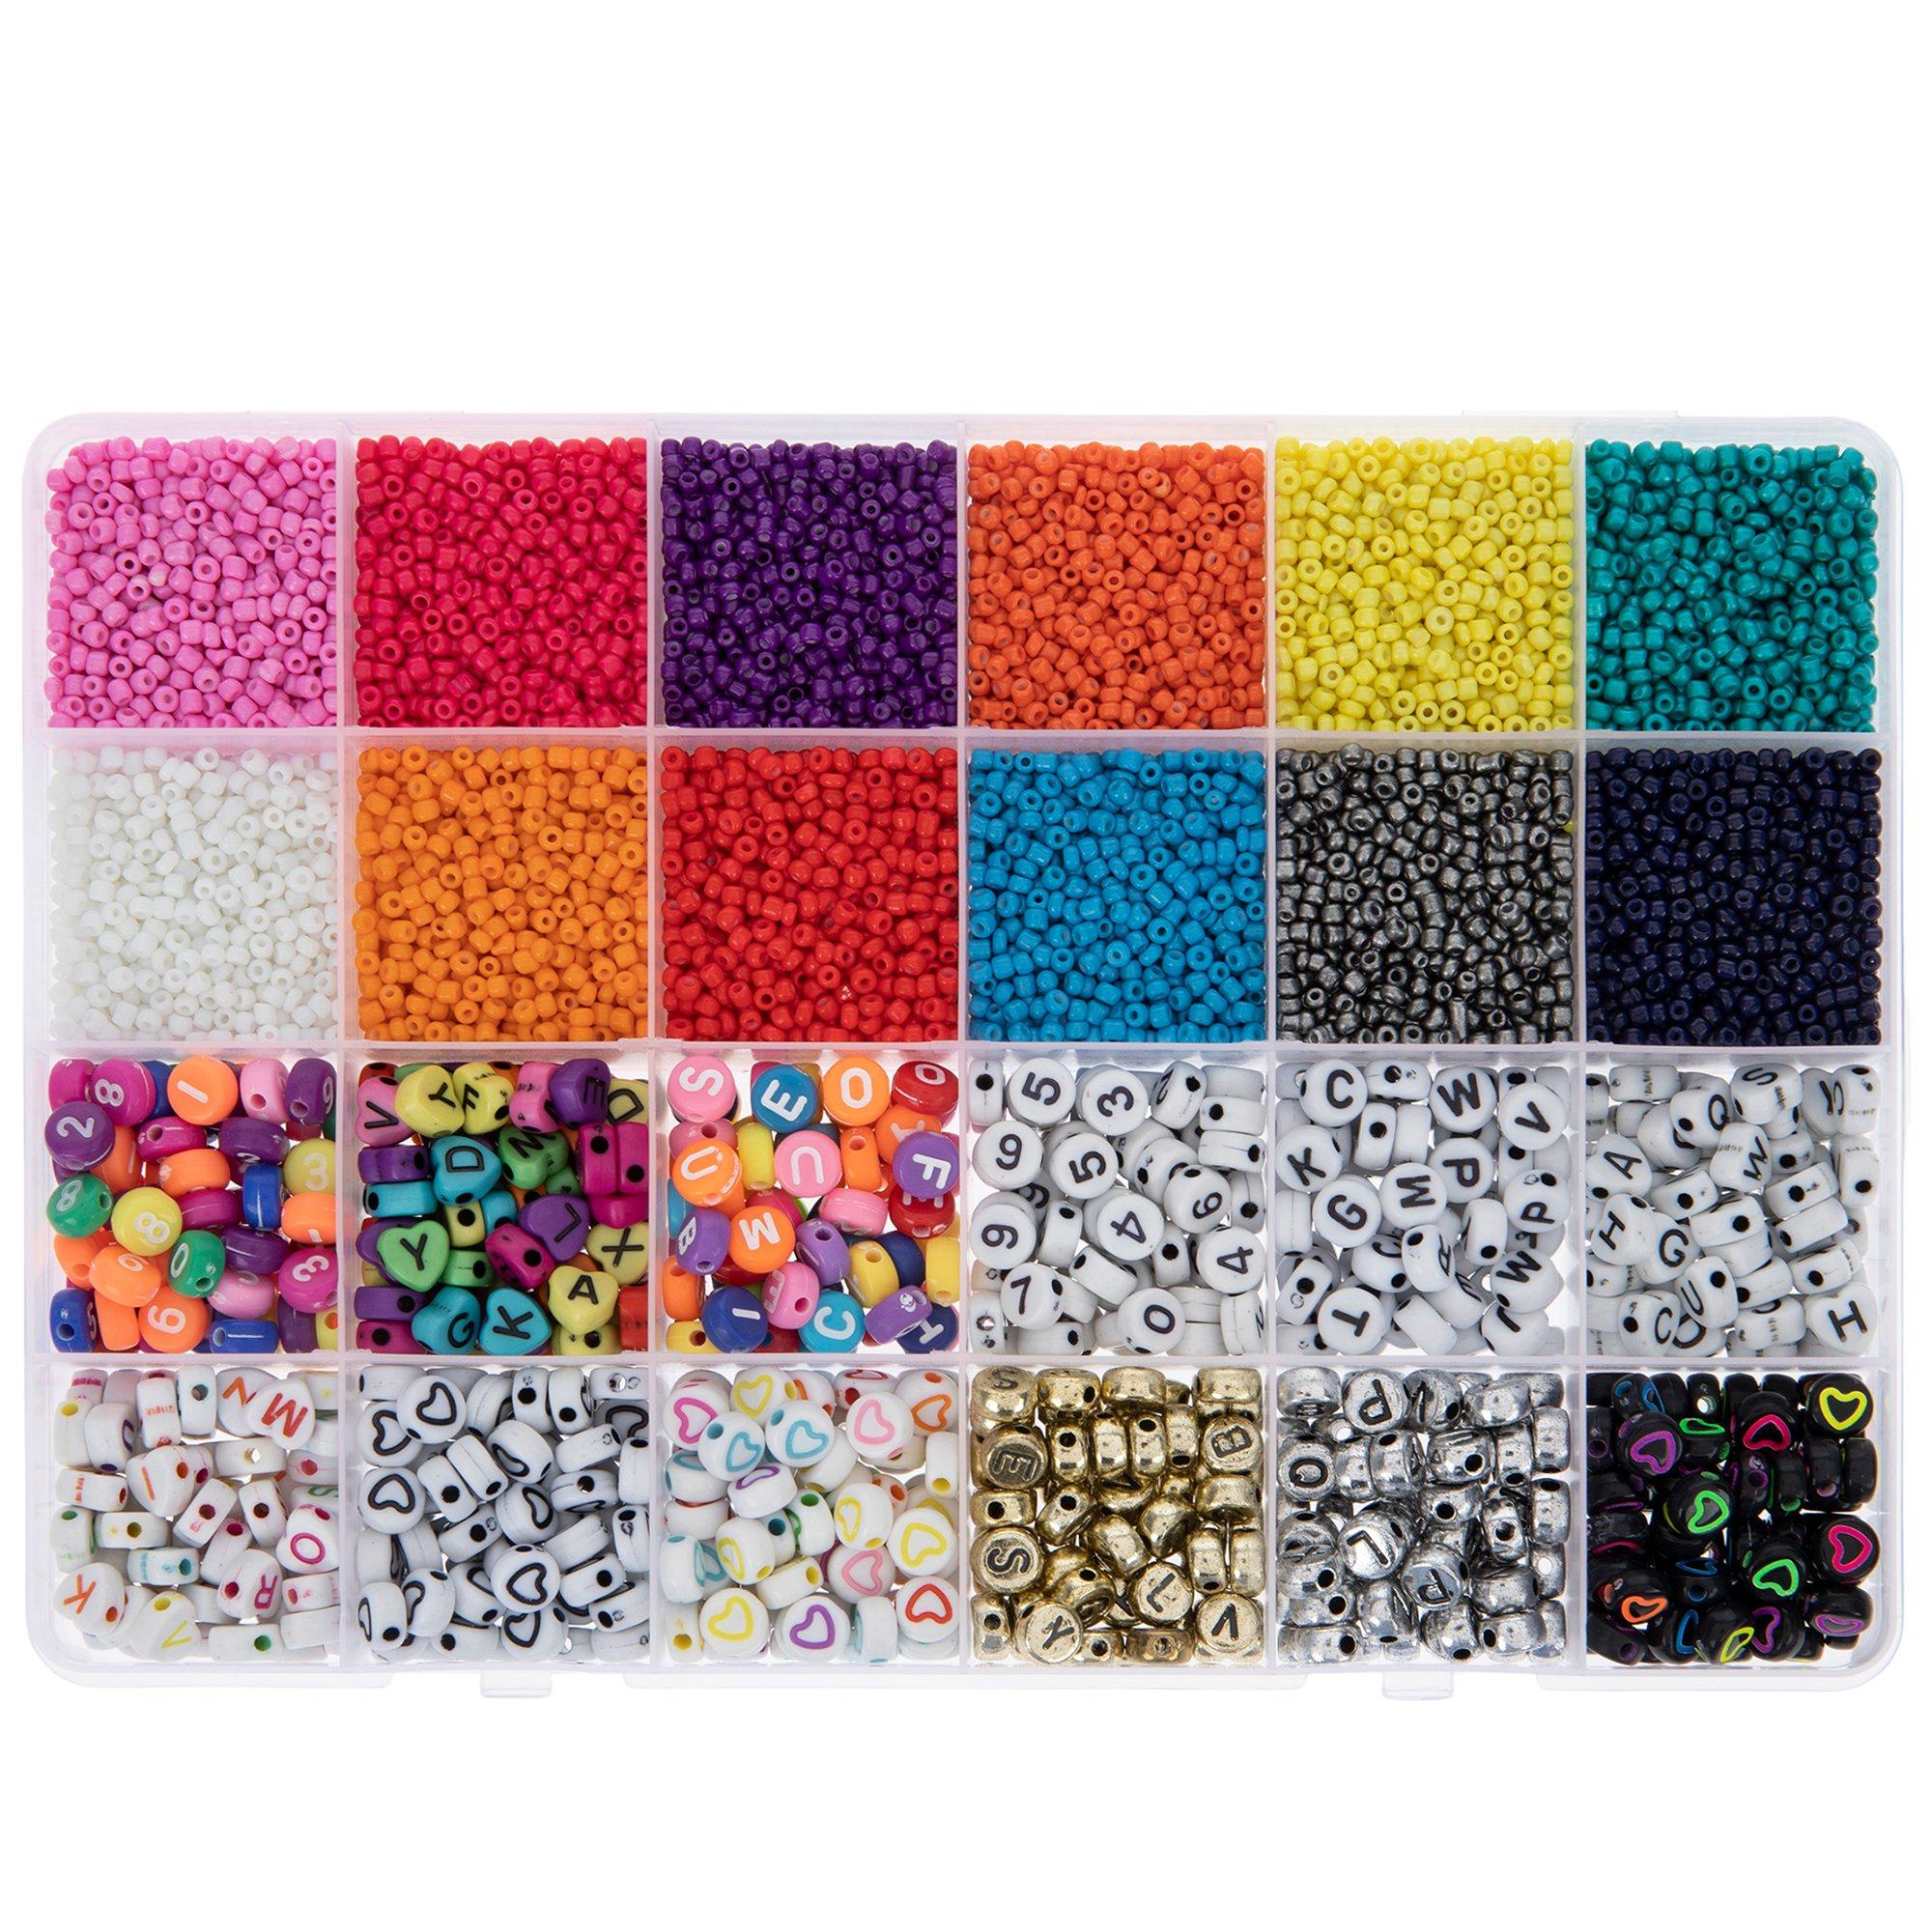 Acrylic Seed Beads Kit For Needlework Craft Small Beads Kit For